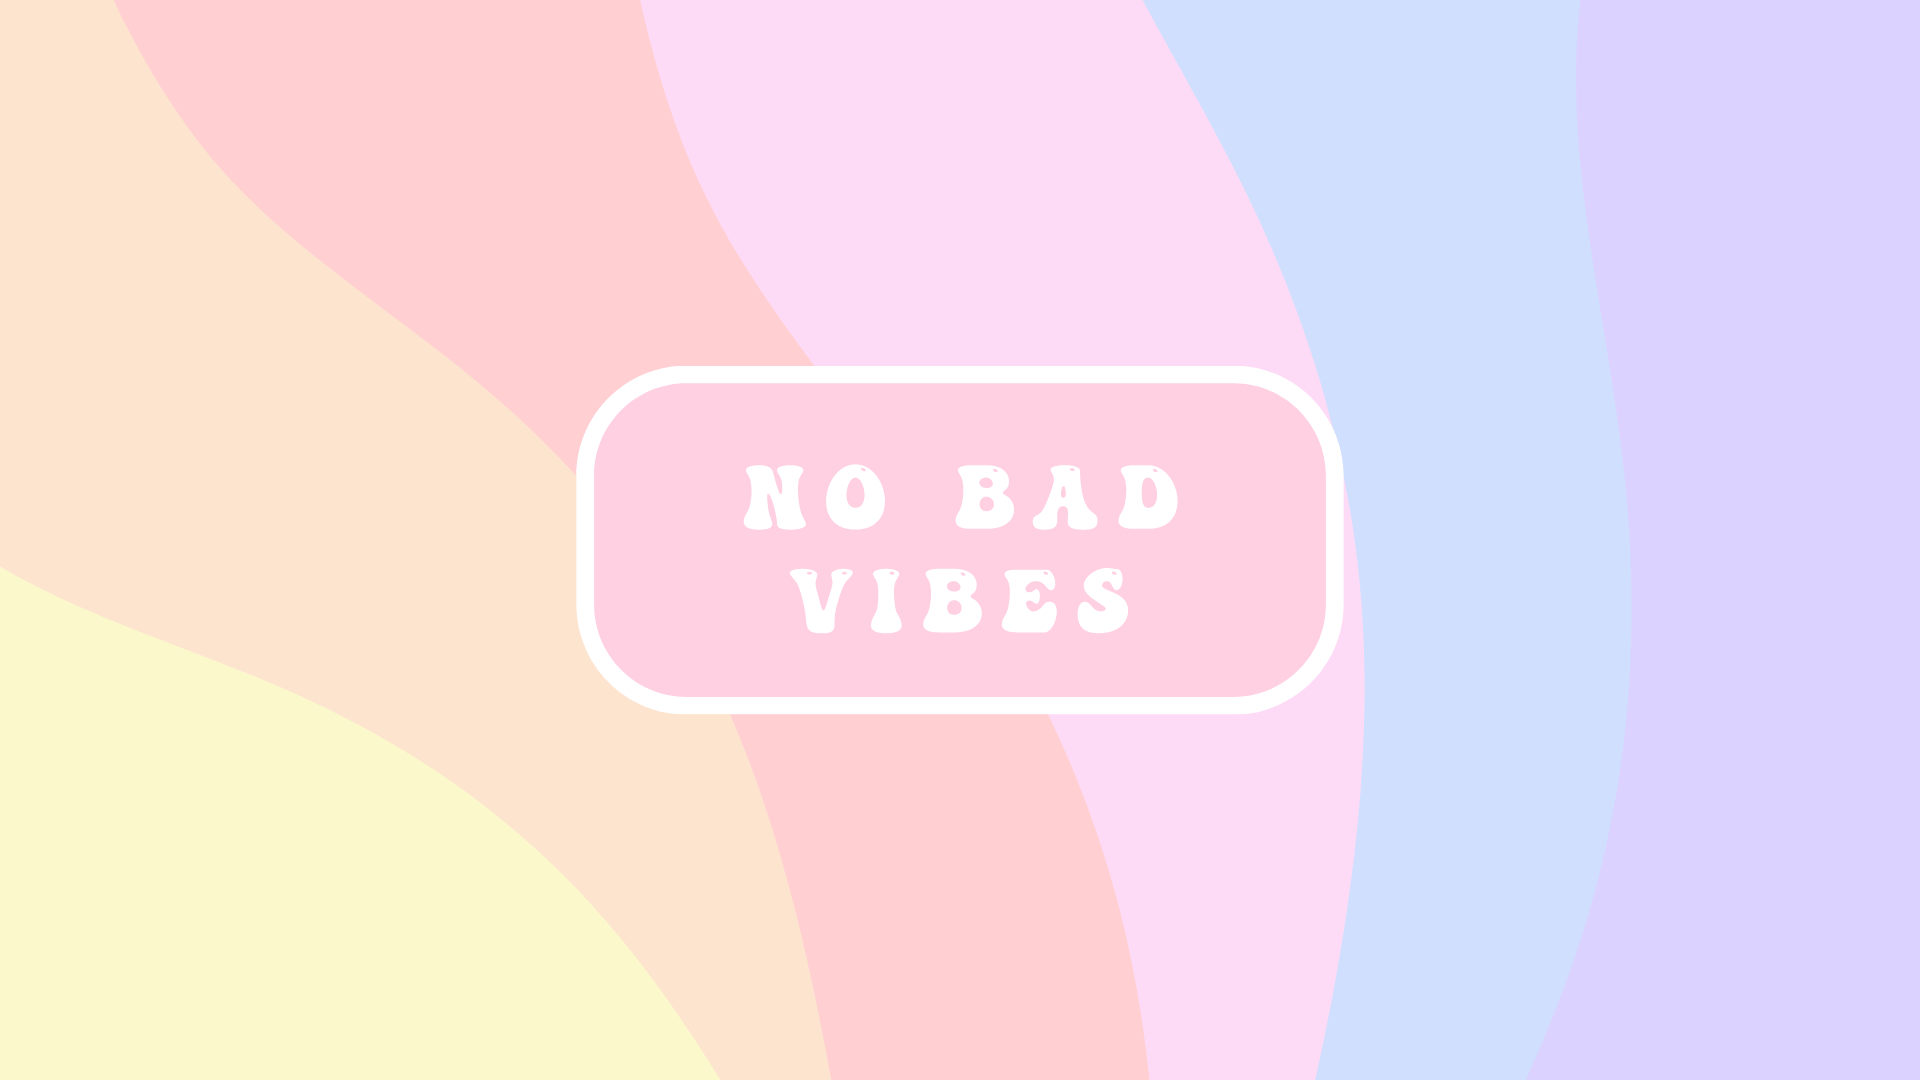 No bad vibes, a motivational quote on a colorful background - Laptop, preppy, positive, design, computer, couple, HD, modern, beautiful, cool